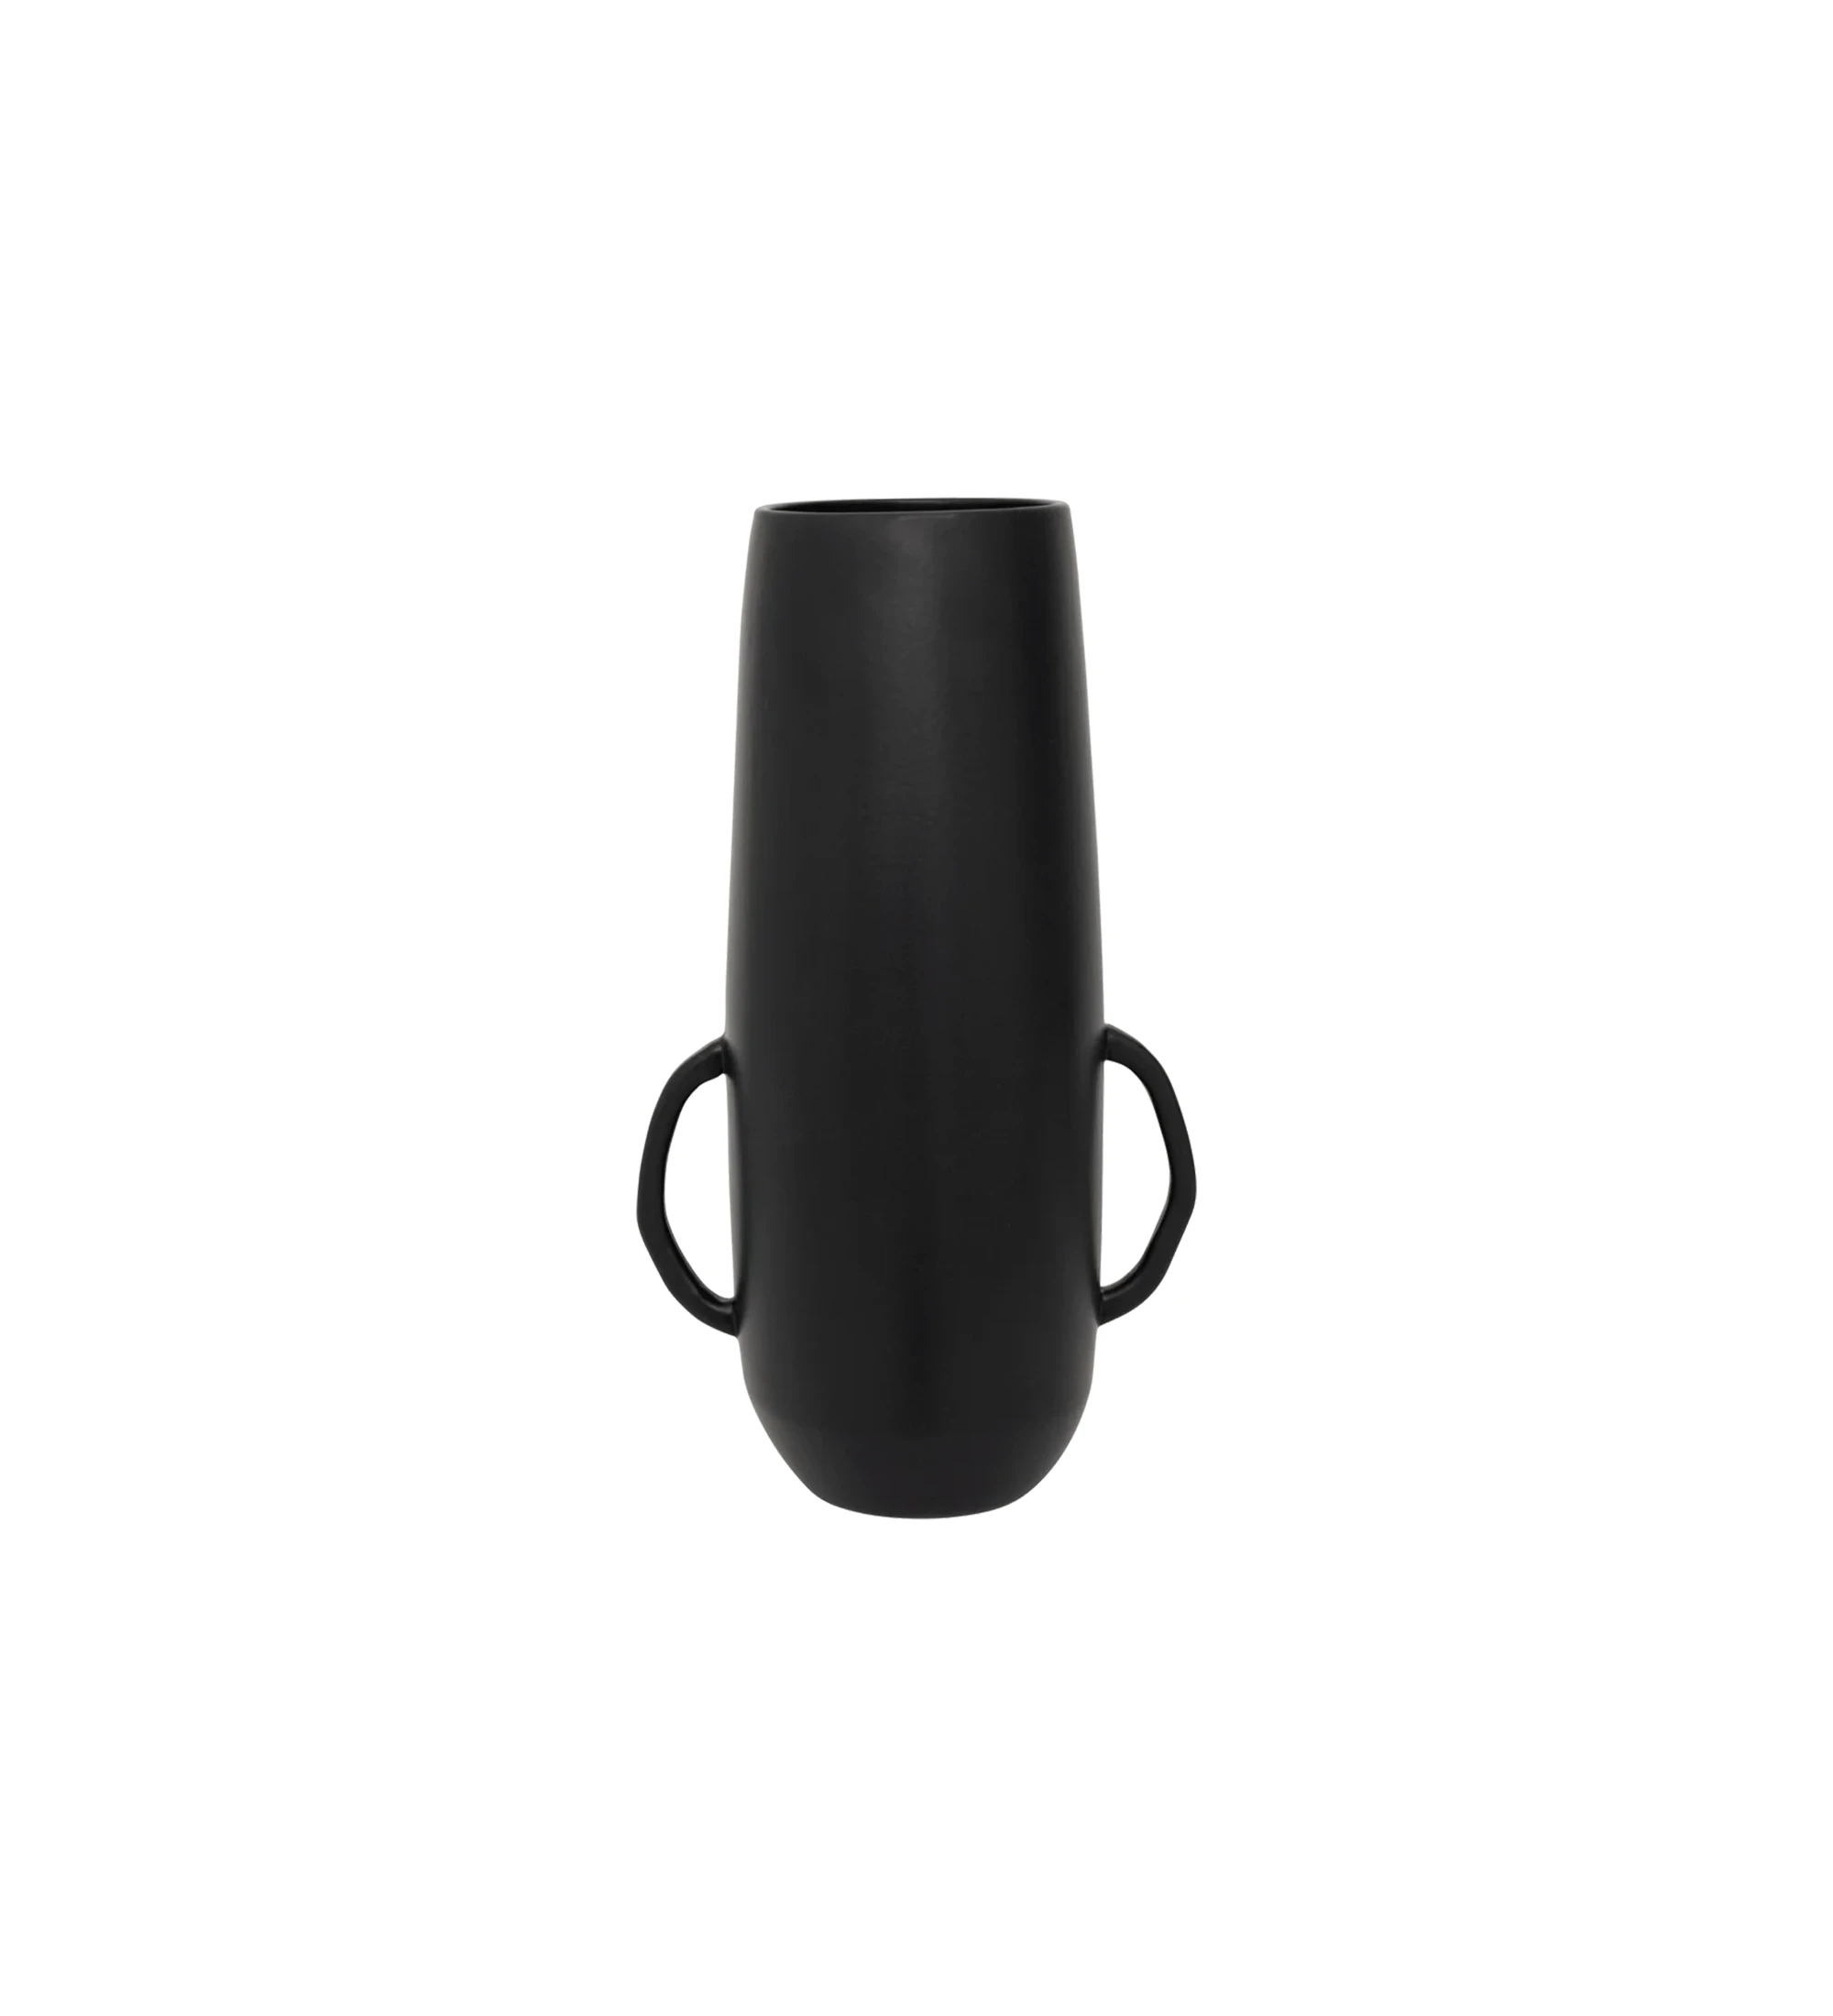 Handmade vase with ceramic structure in matte black and with an organic and intuitive design.